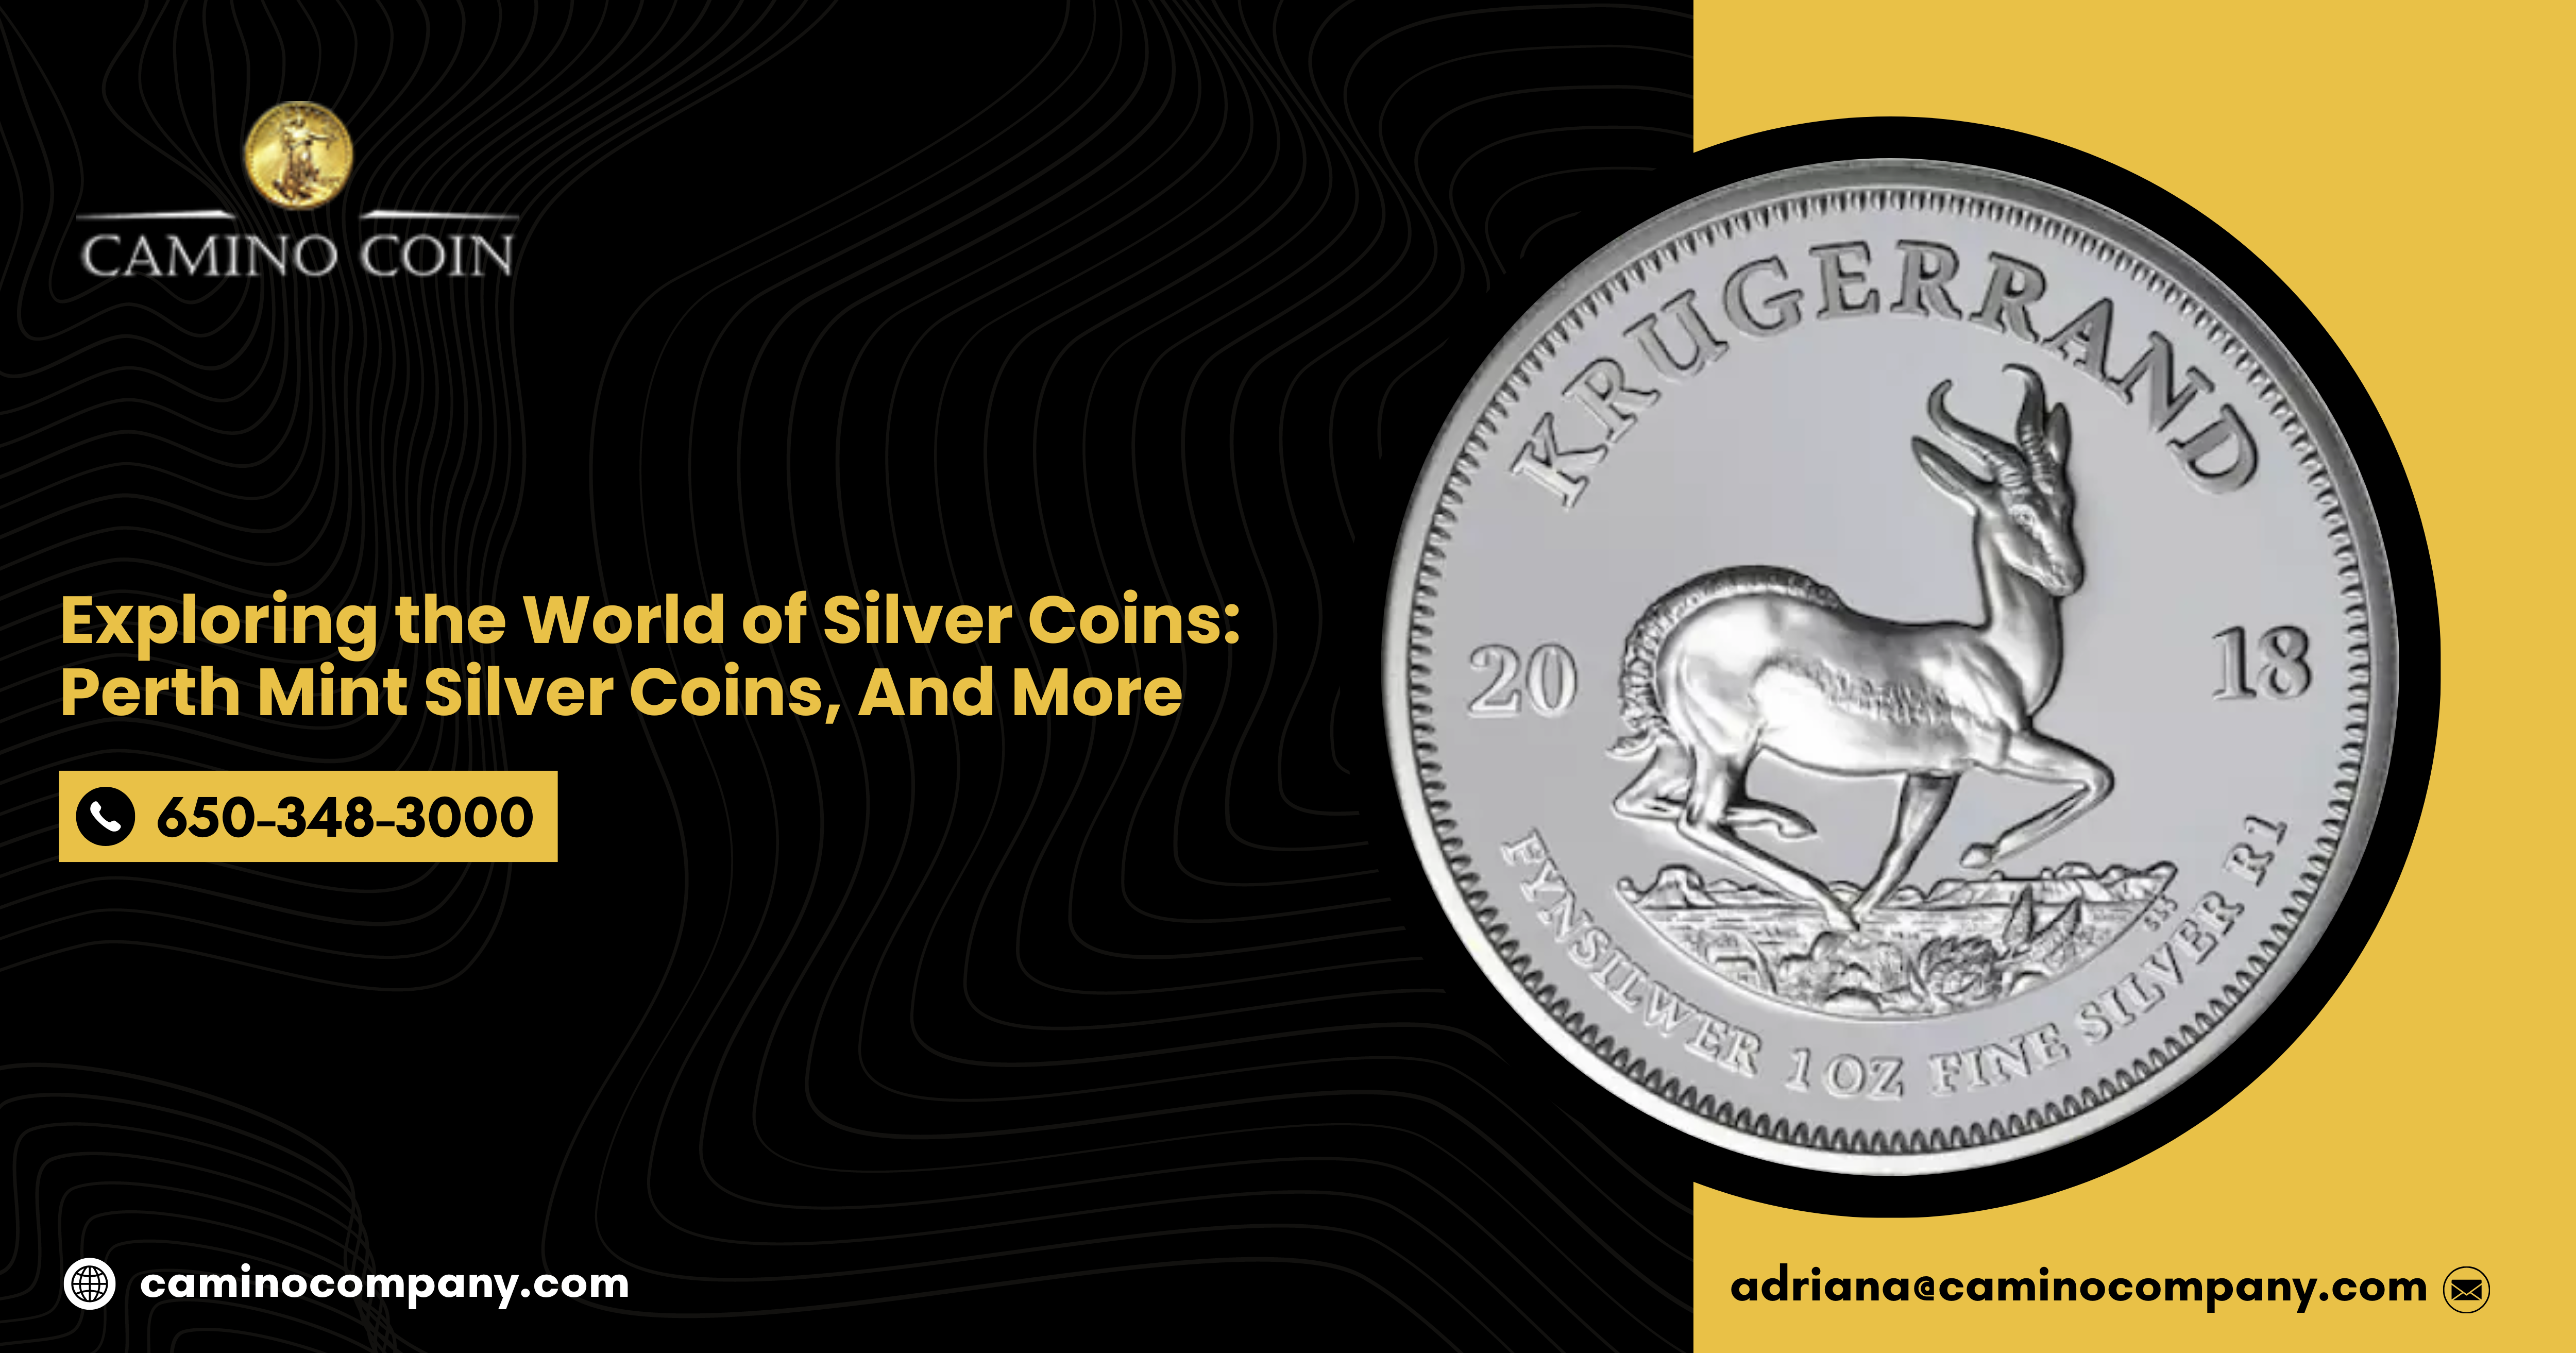  Exploring the World of Silver Coins: Perth Mint Silver Coins, And More